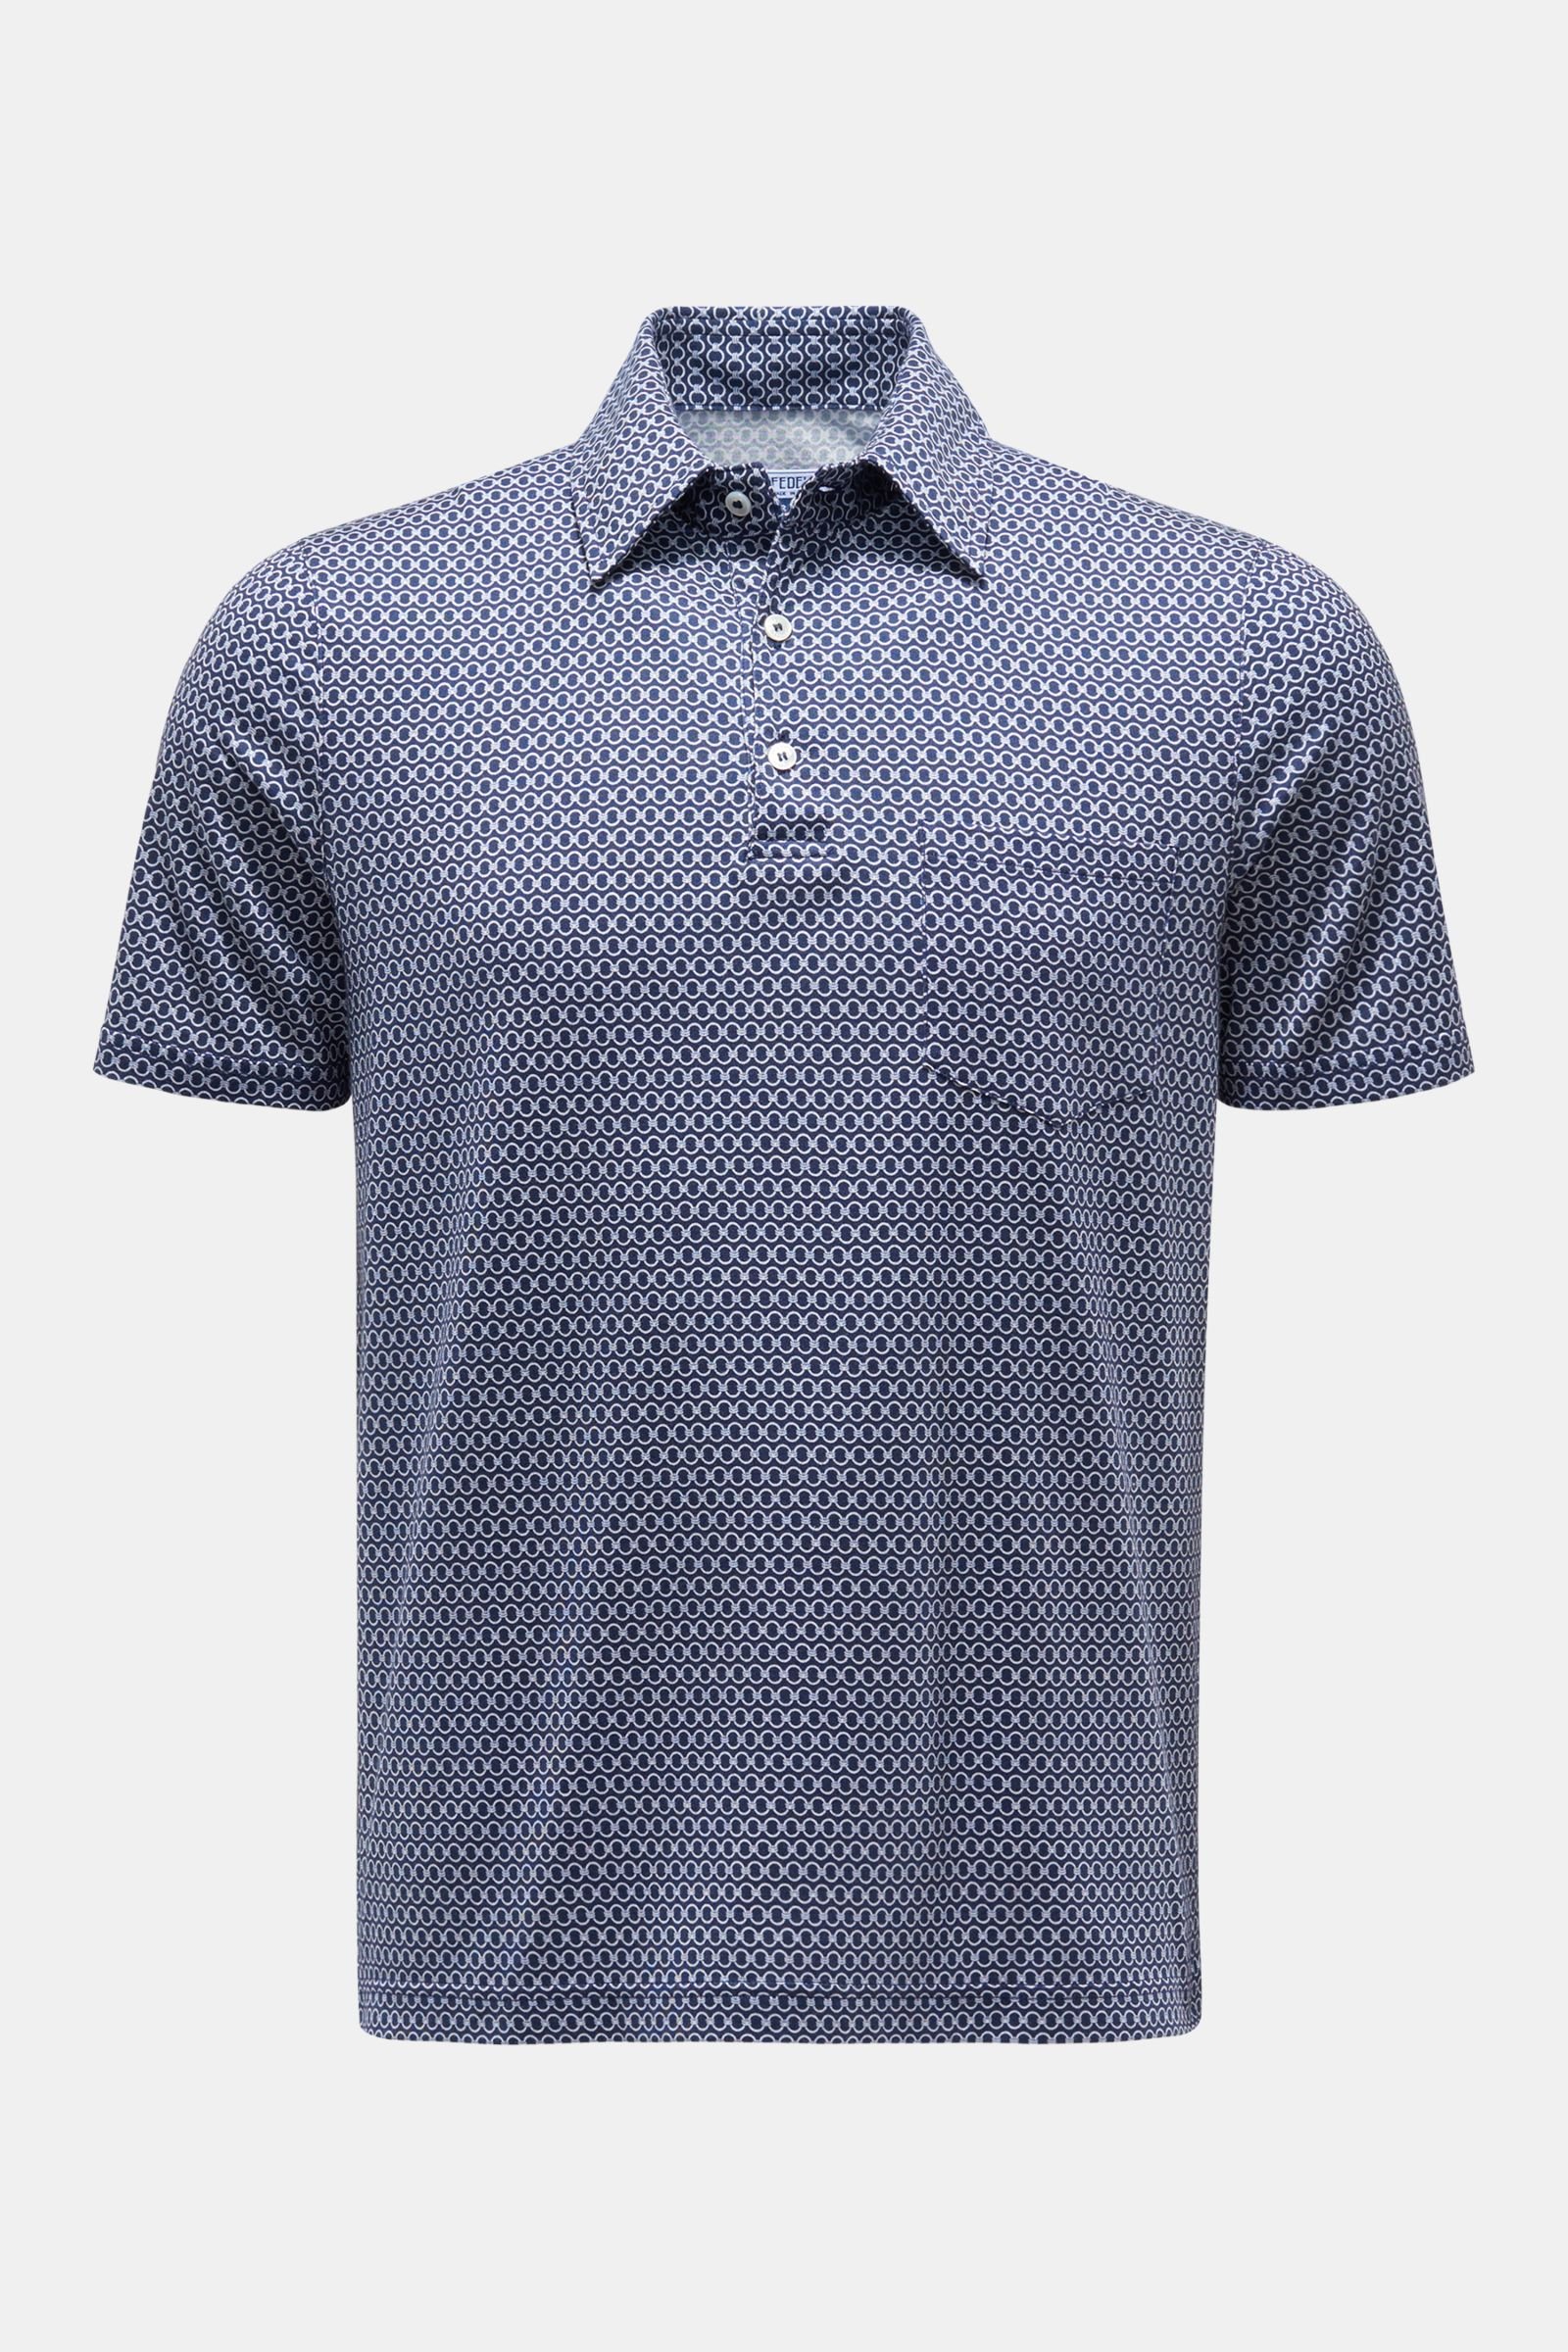 Jersey polo shirt 'Bell' navy/white patterned